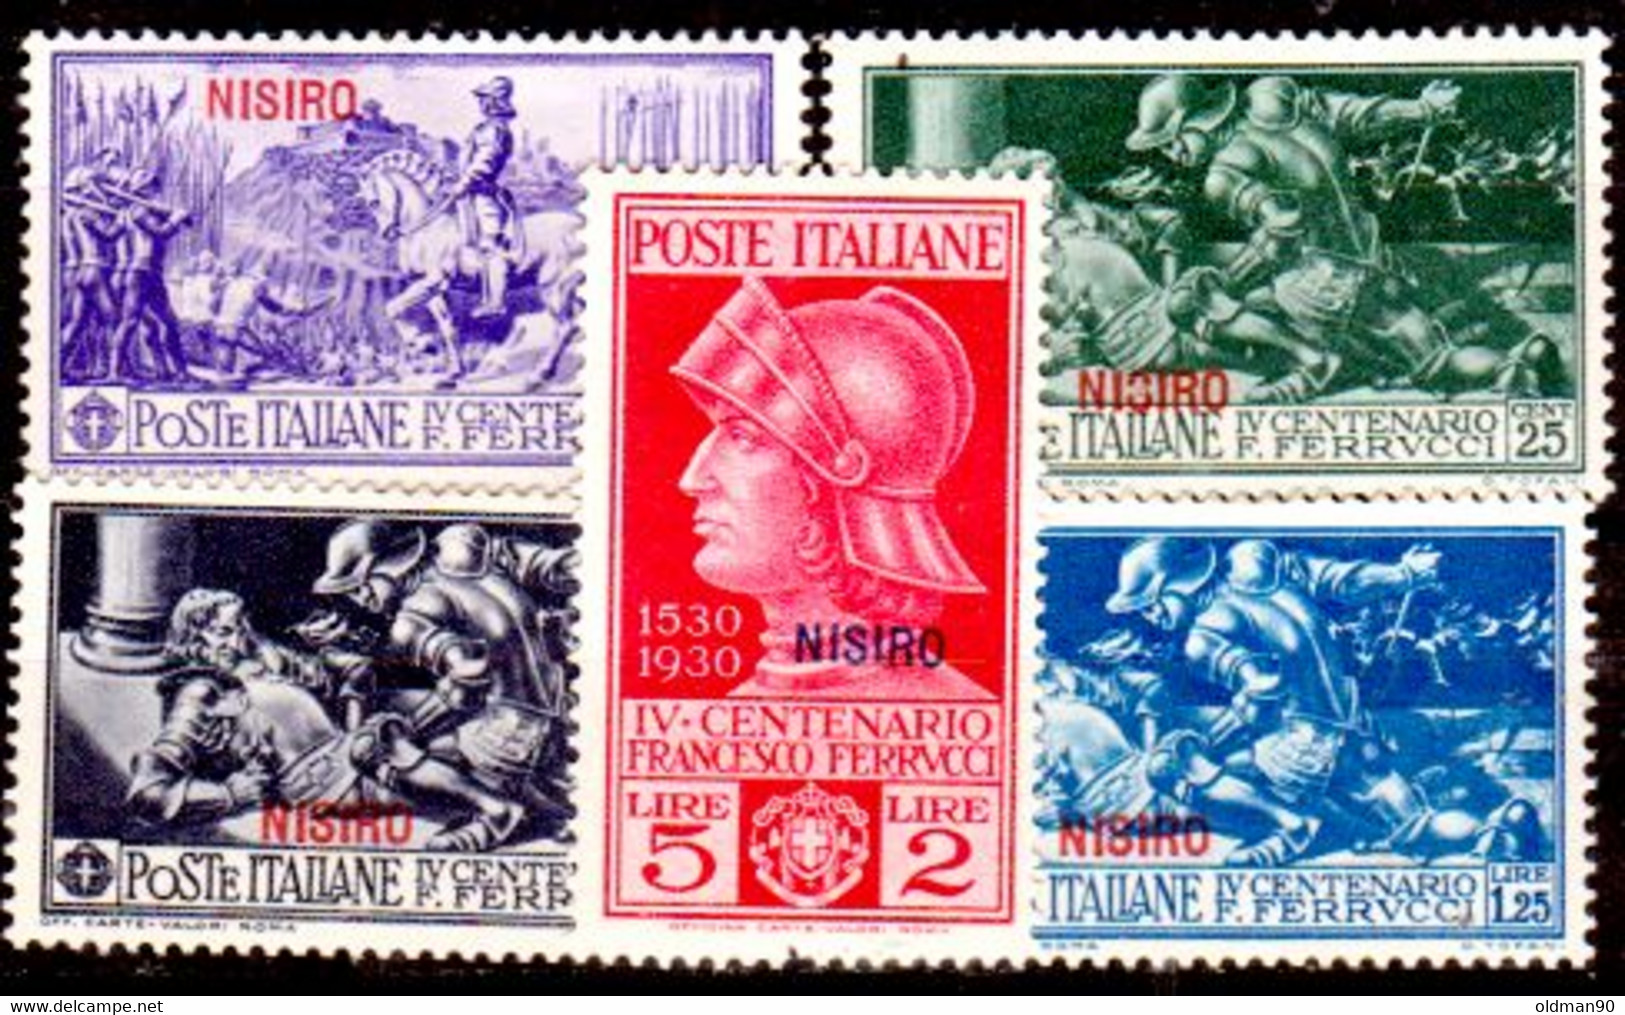 Egeo-OS-308- Nisiro: Original Stamps And Overprint 1930 (+) Hinged - Quality In Your Opinion. - Aegean (Nisiro)